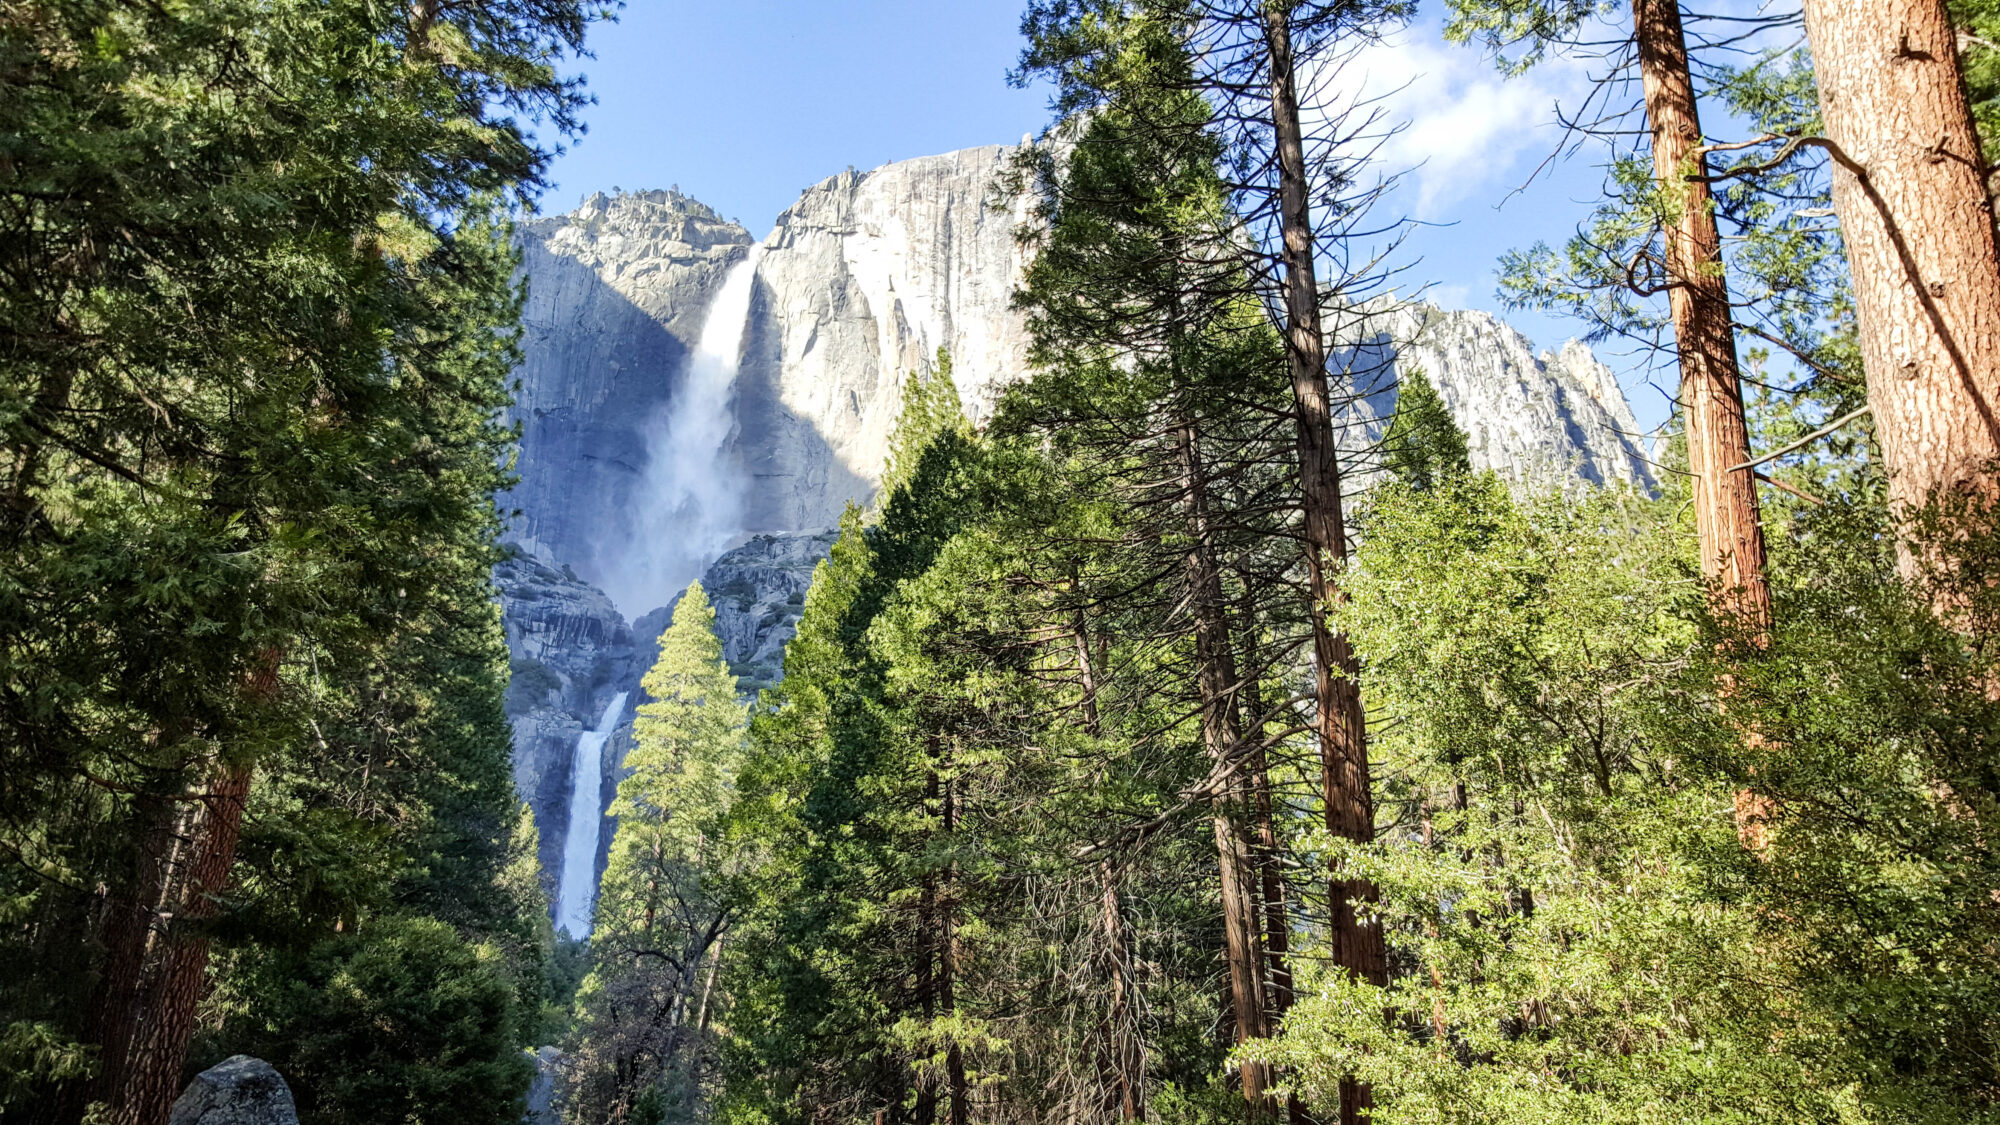 A view of both Lower and Upper Yosemite Falls